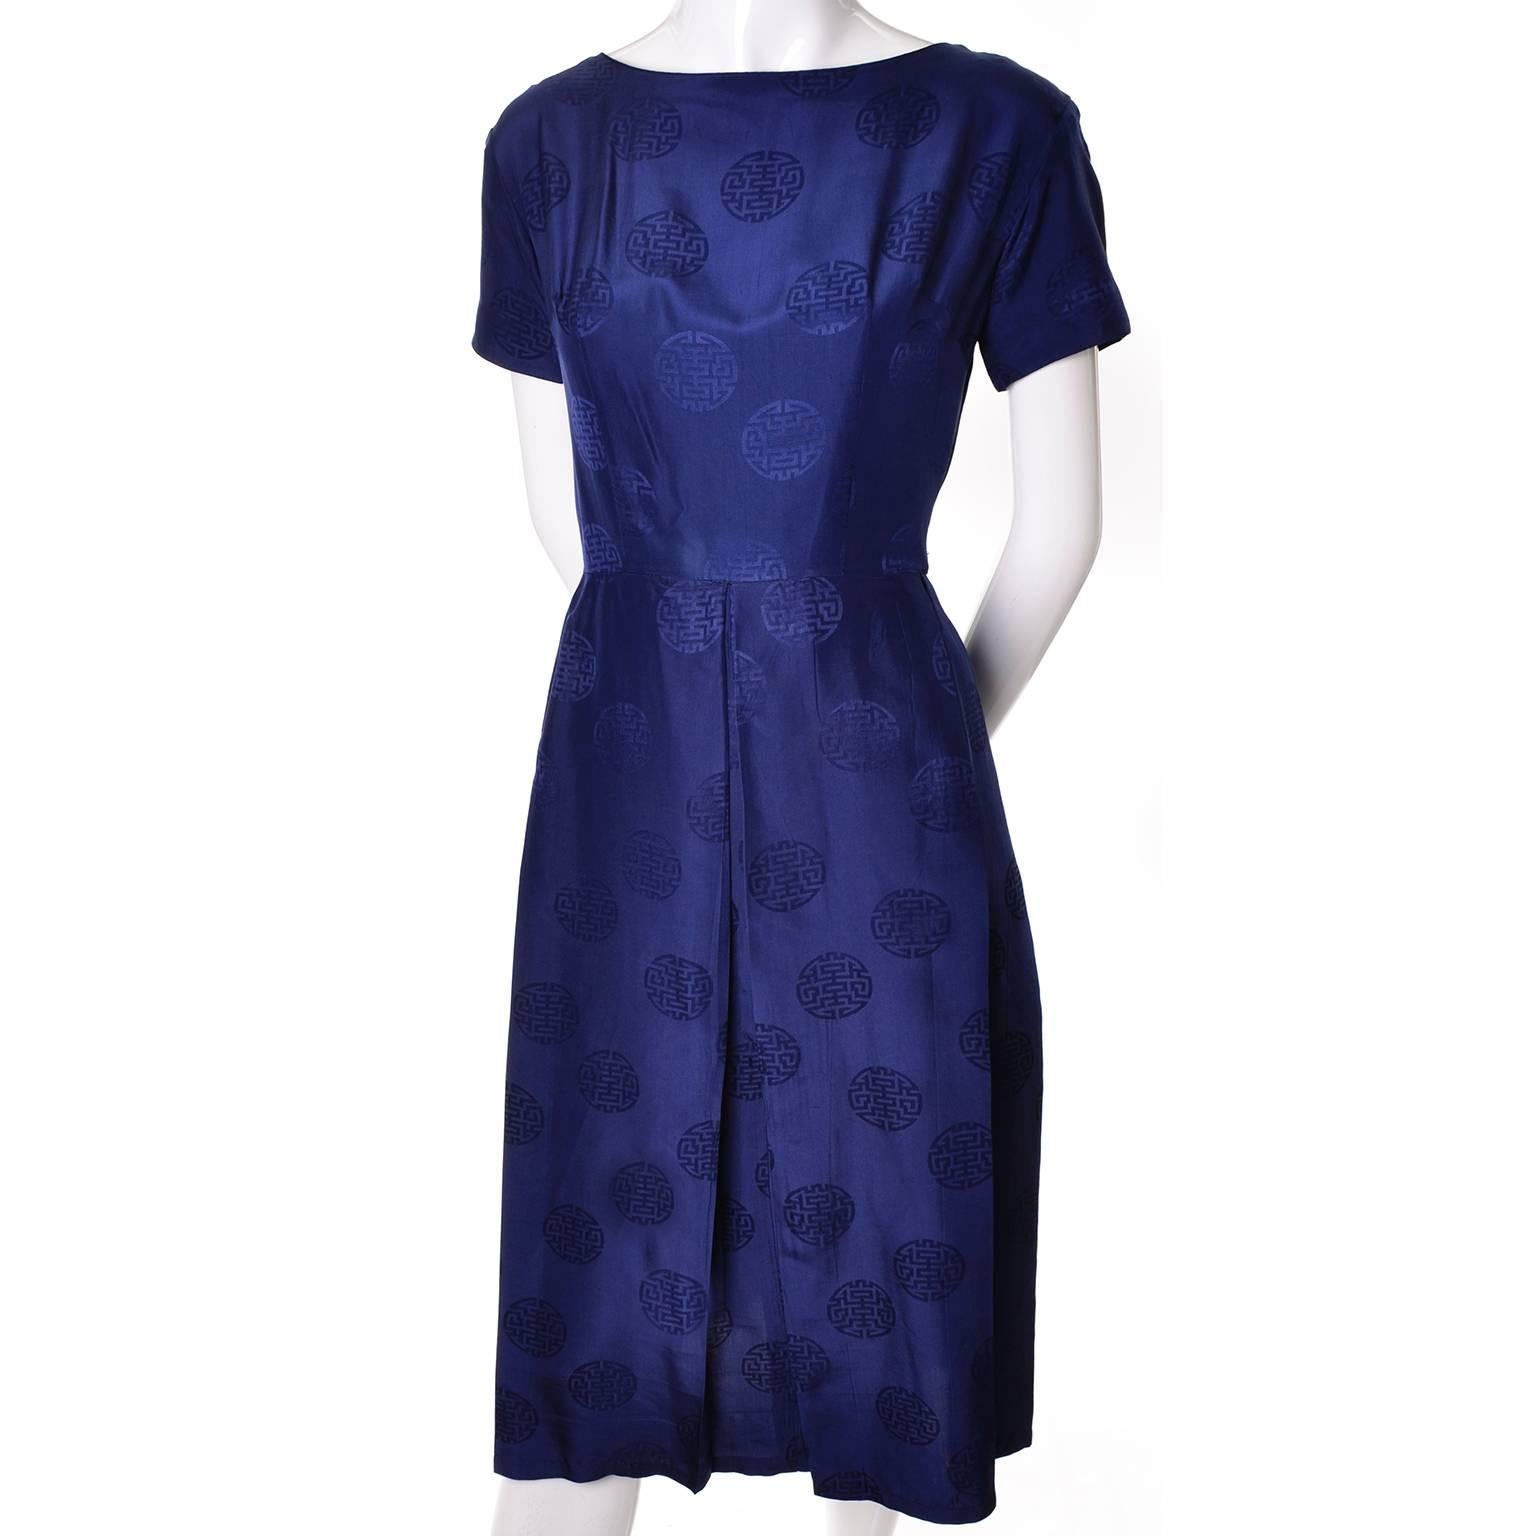 This is a lovely blue 100% silk dress with a tone-on-tone Asian moan print. This Dynasty 1960's dress has a boat neck and fabric buttons up the back. The full skirt has lovely pleats and this dress is in excellent condition. Made in Hong Kong